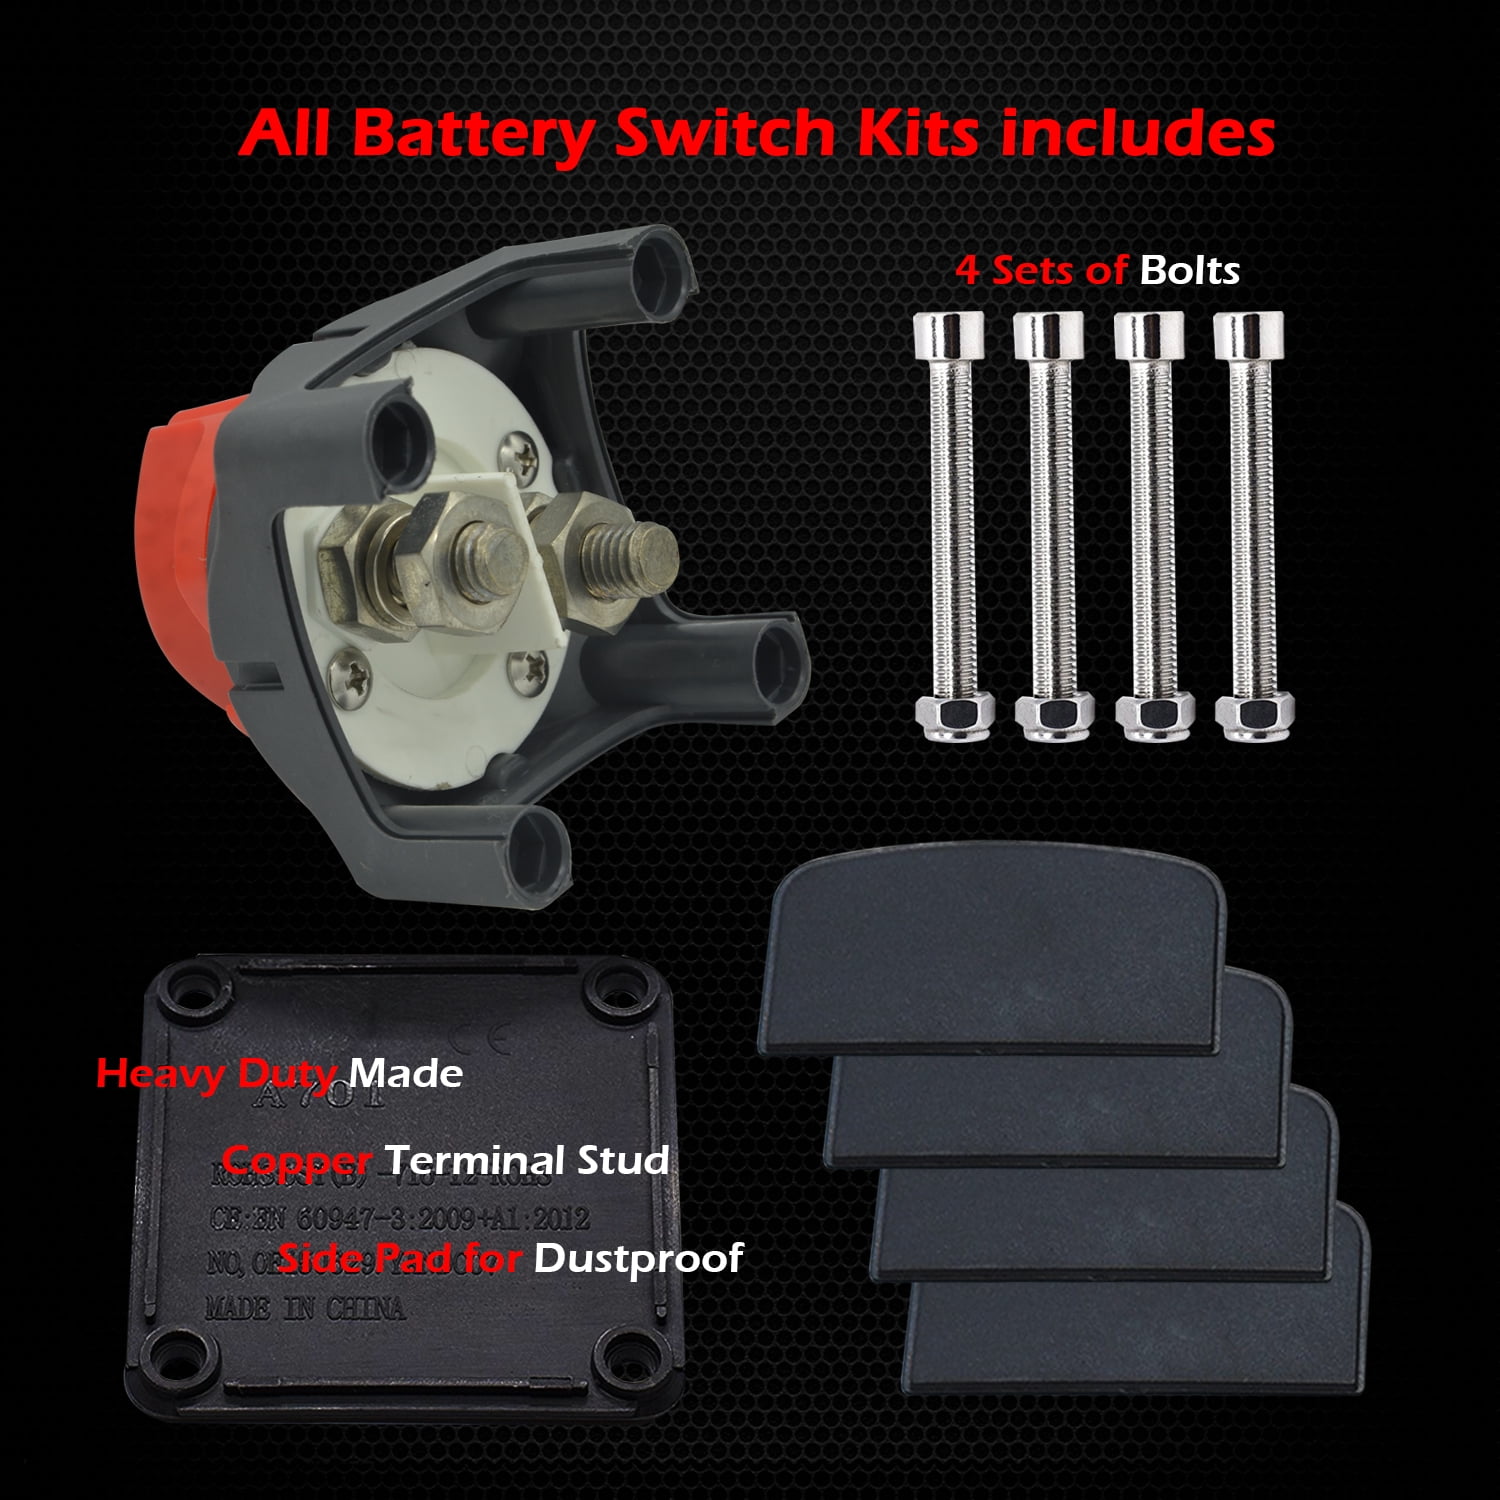 1-2-Both-Off Ampper 1-2-Both-Off Battery Disconnect Switch 12-48 V Battery Master Cut Shut Off Isolator Switch 